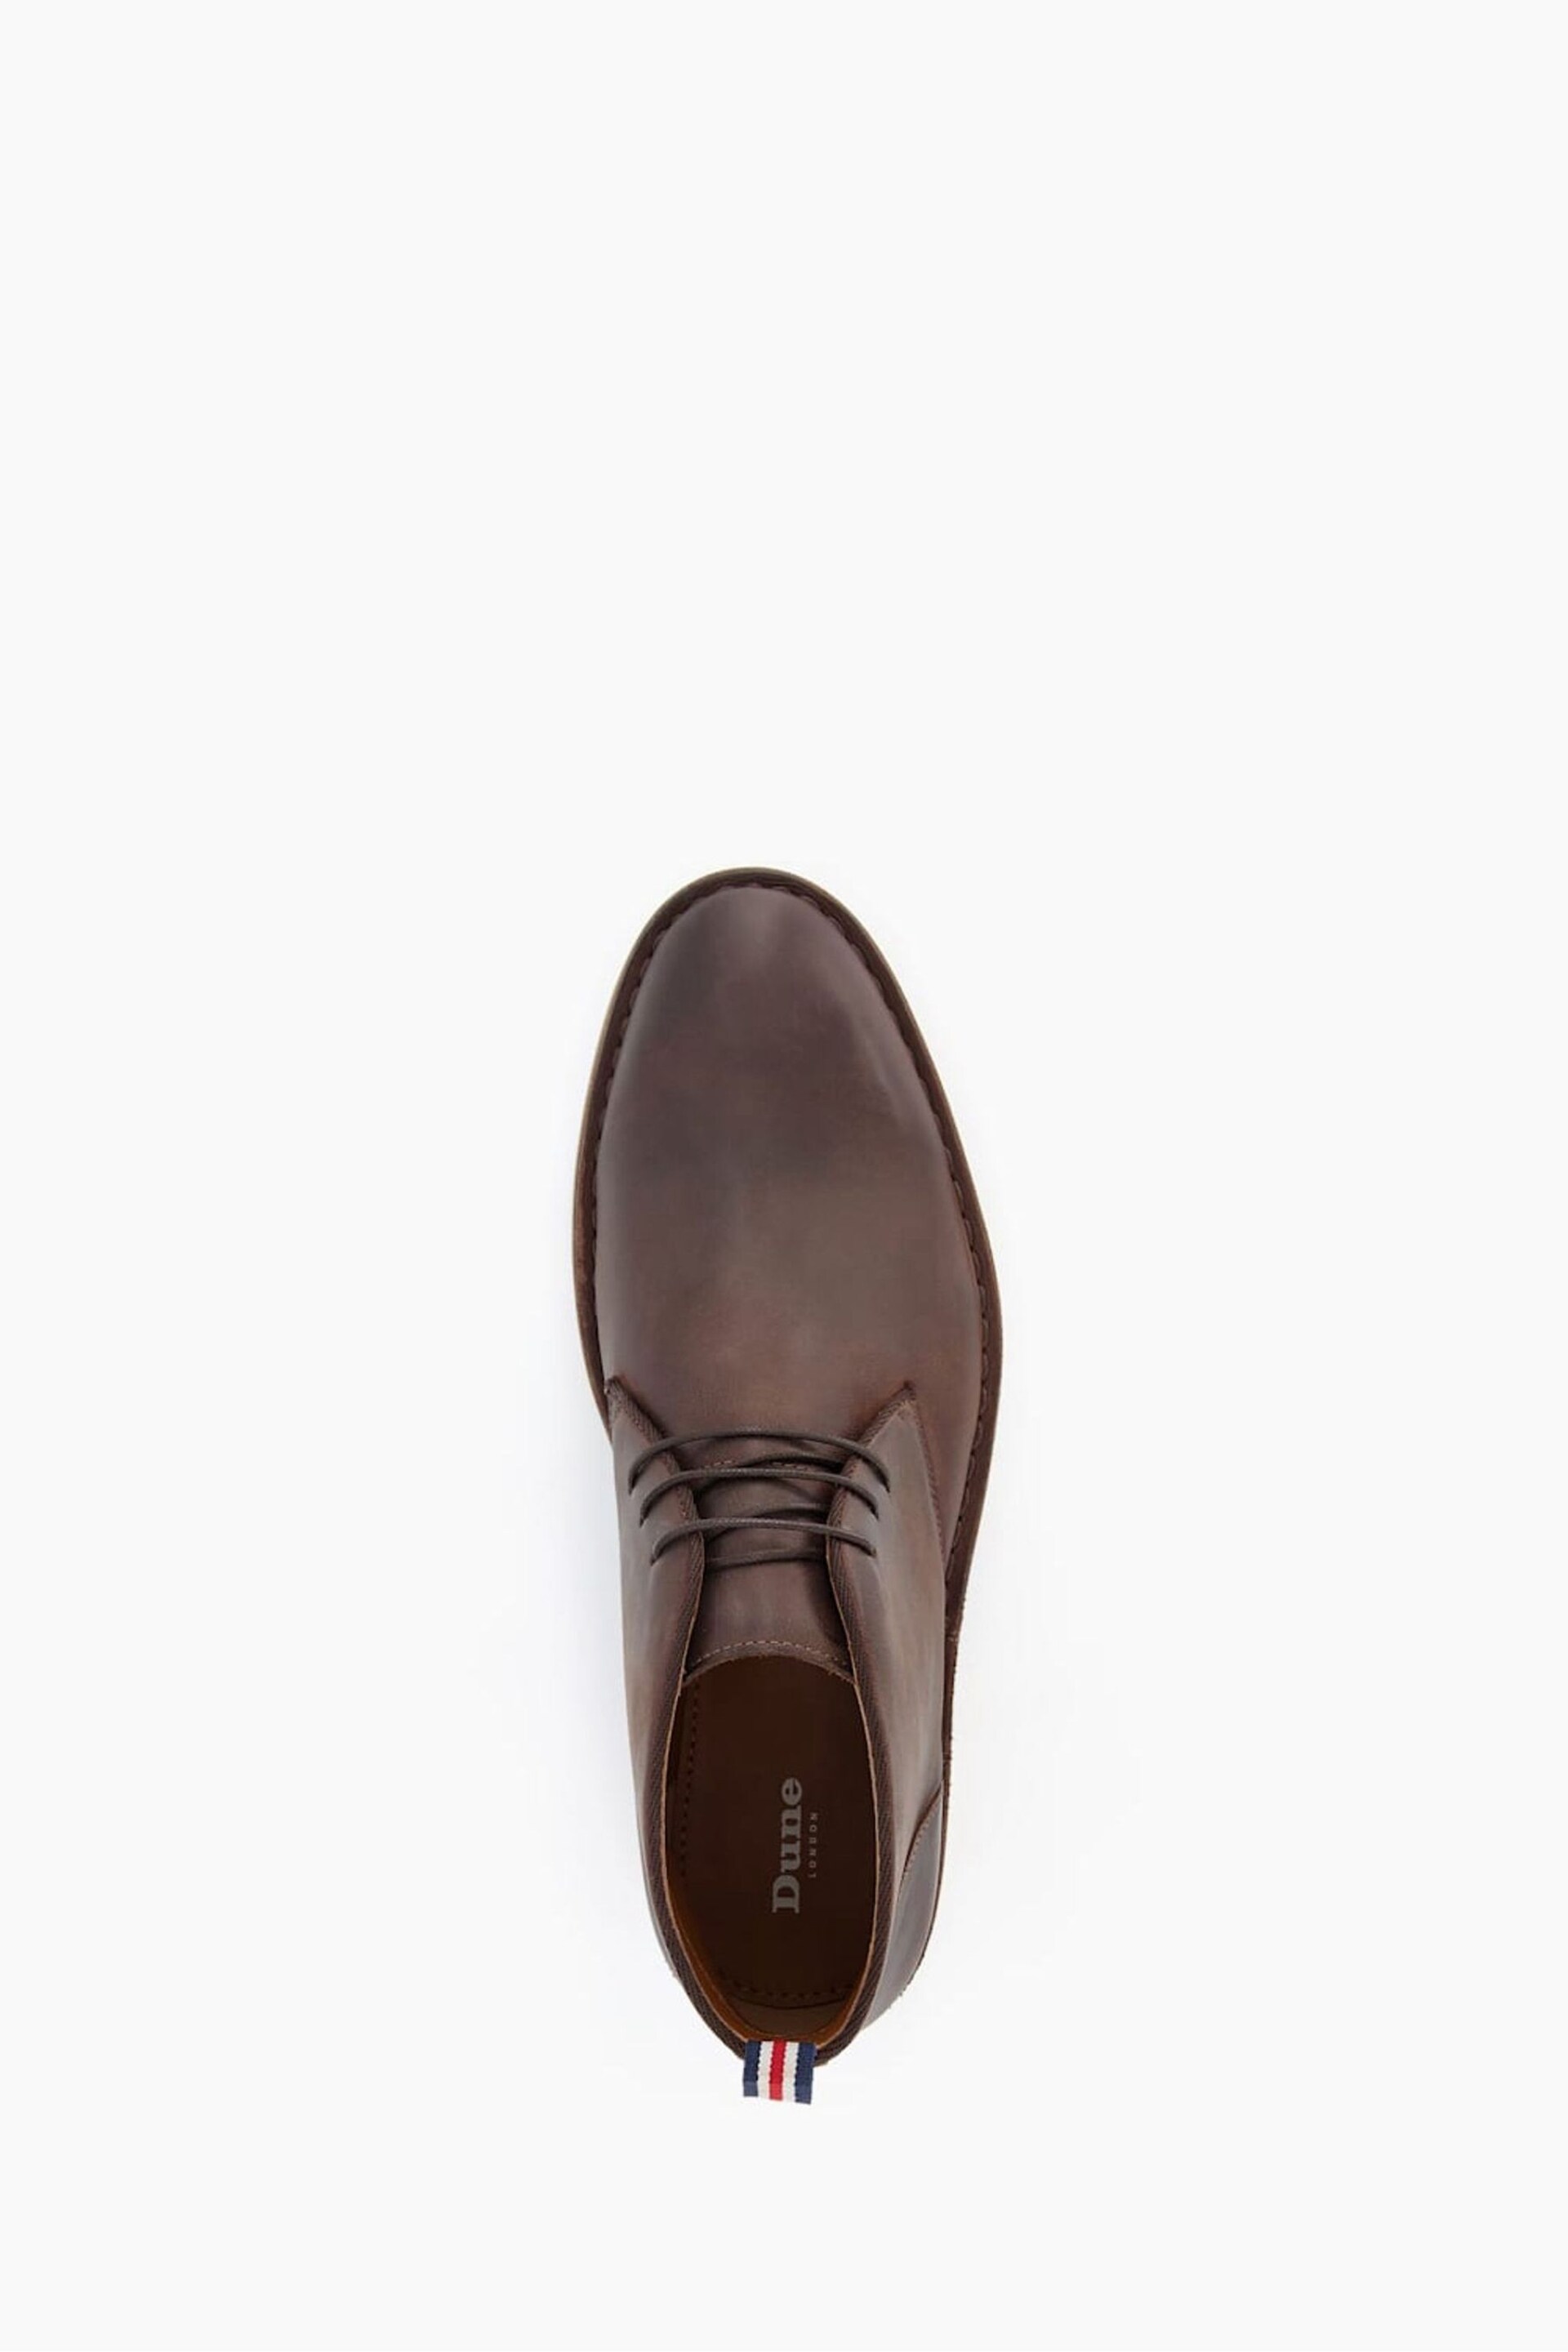 Dune London Brown Cash Lace-Up Chukka Boots - Image 5 of 6